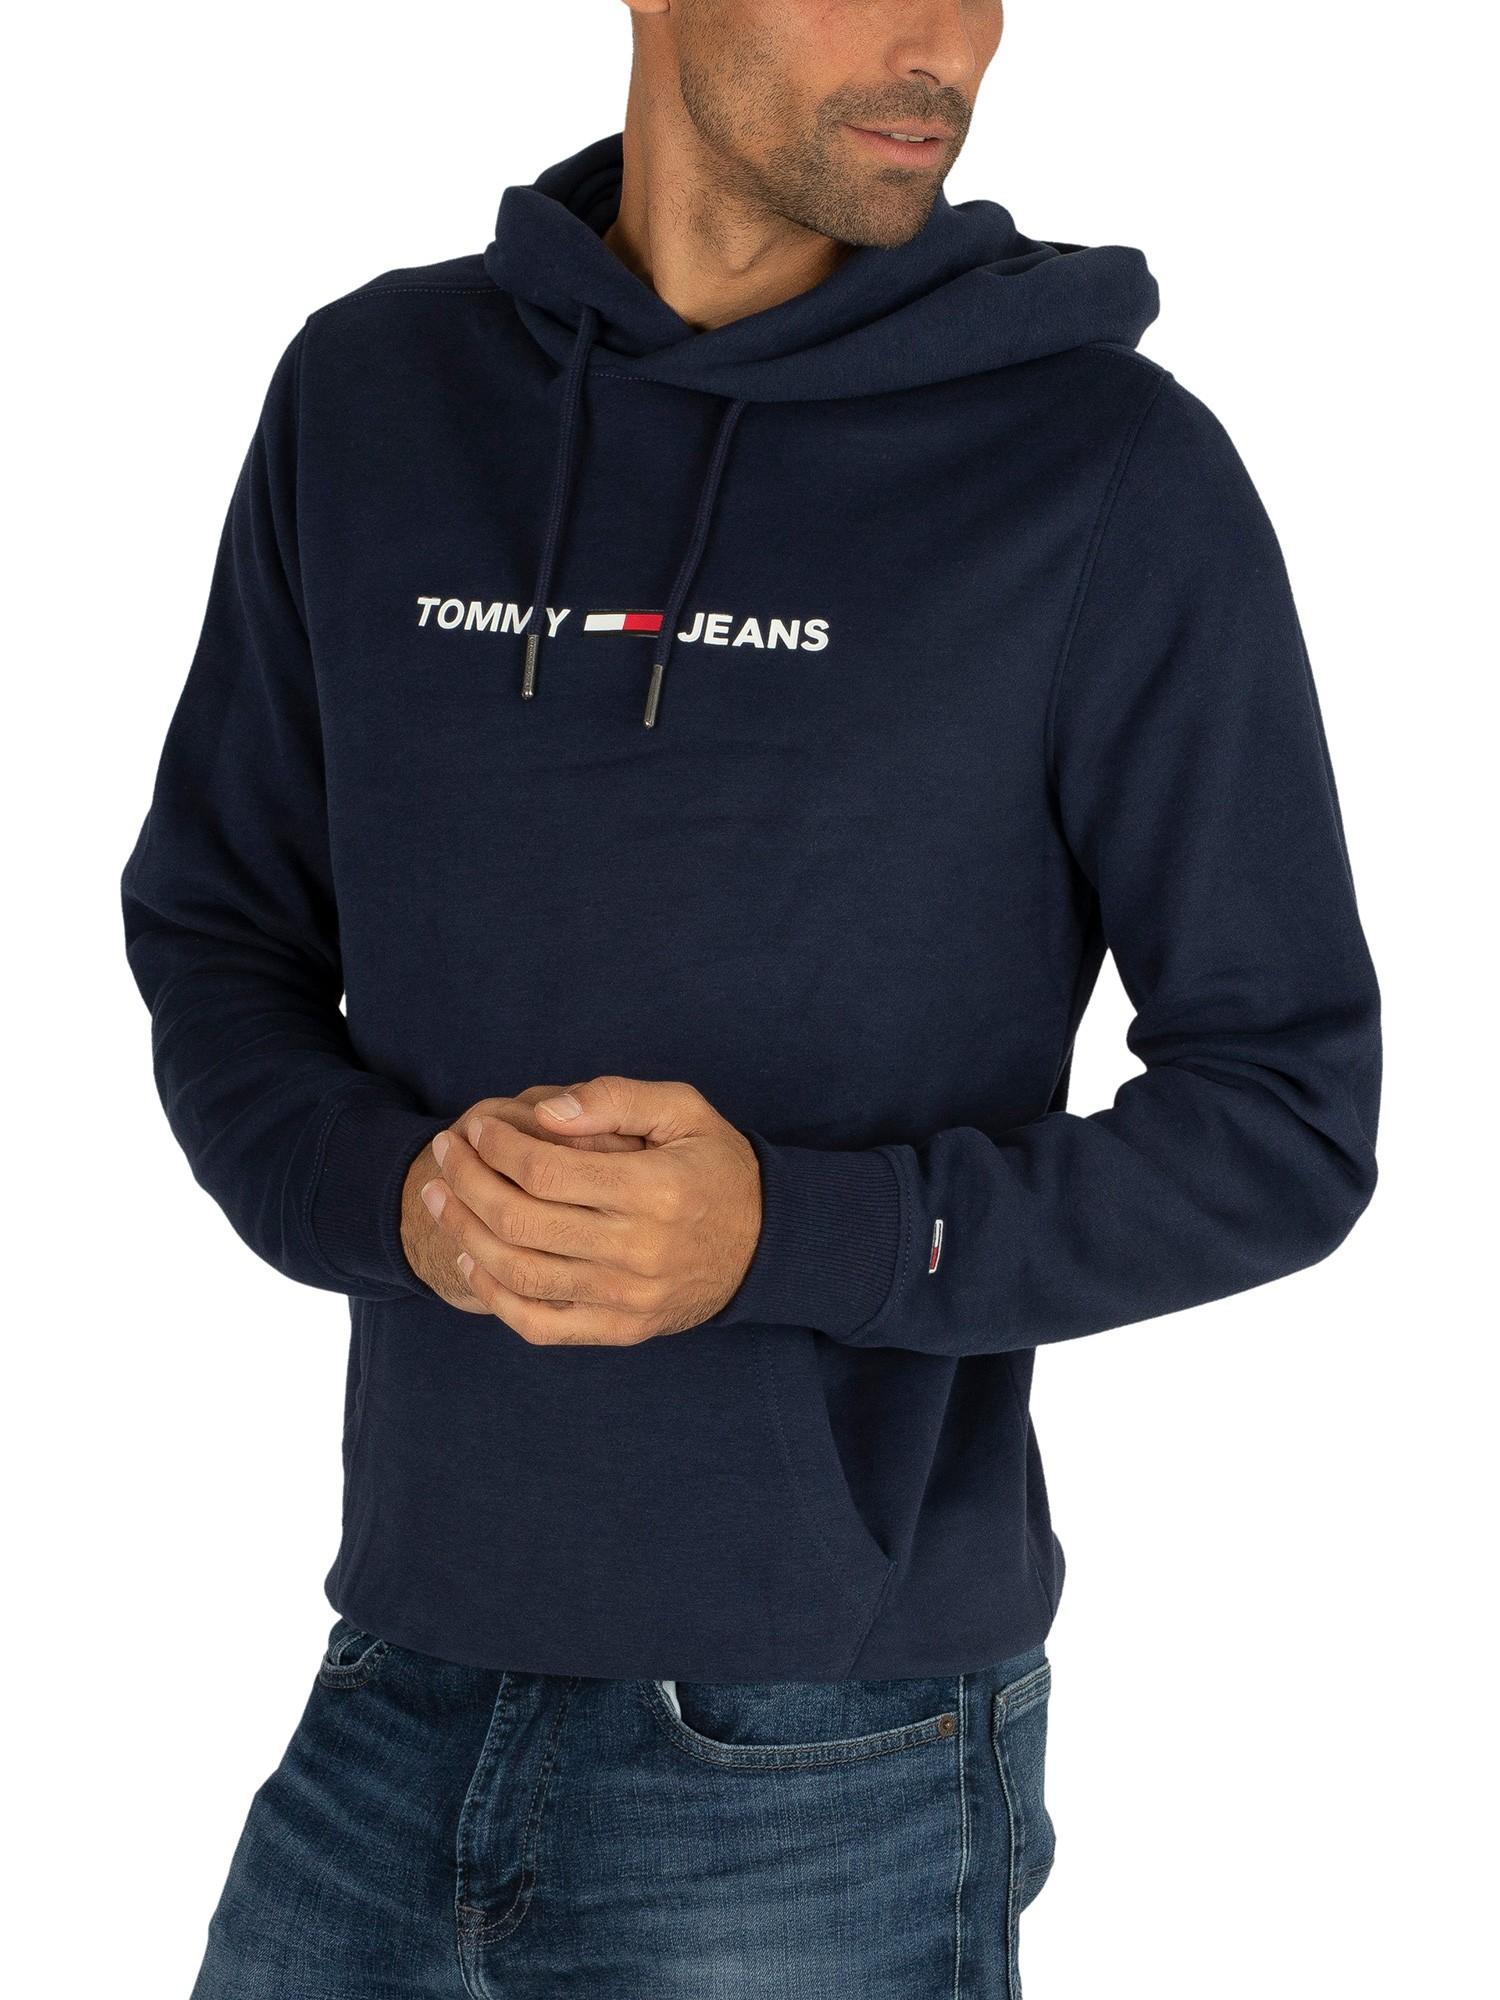 Tommy Jeans Pullover Hoodie Hotsell, 51% OFF | www.emanagreen.com